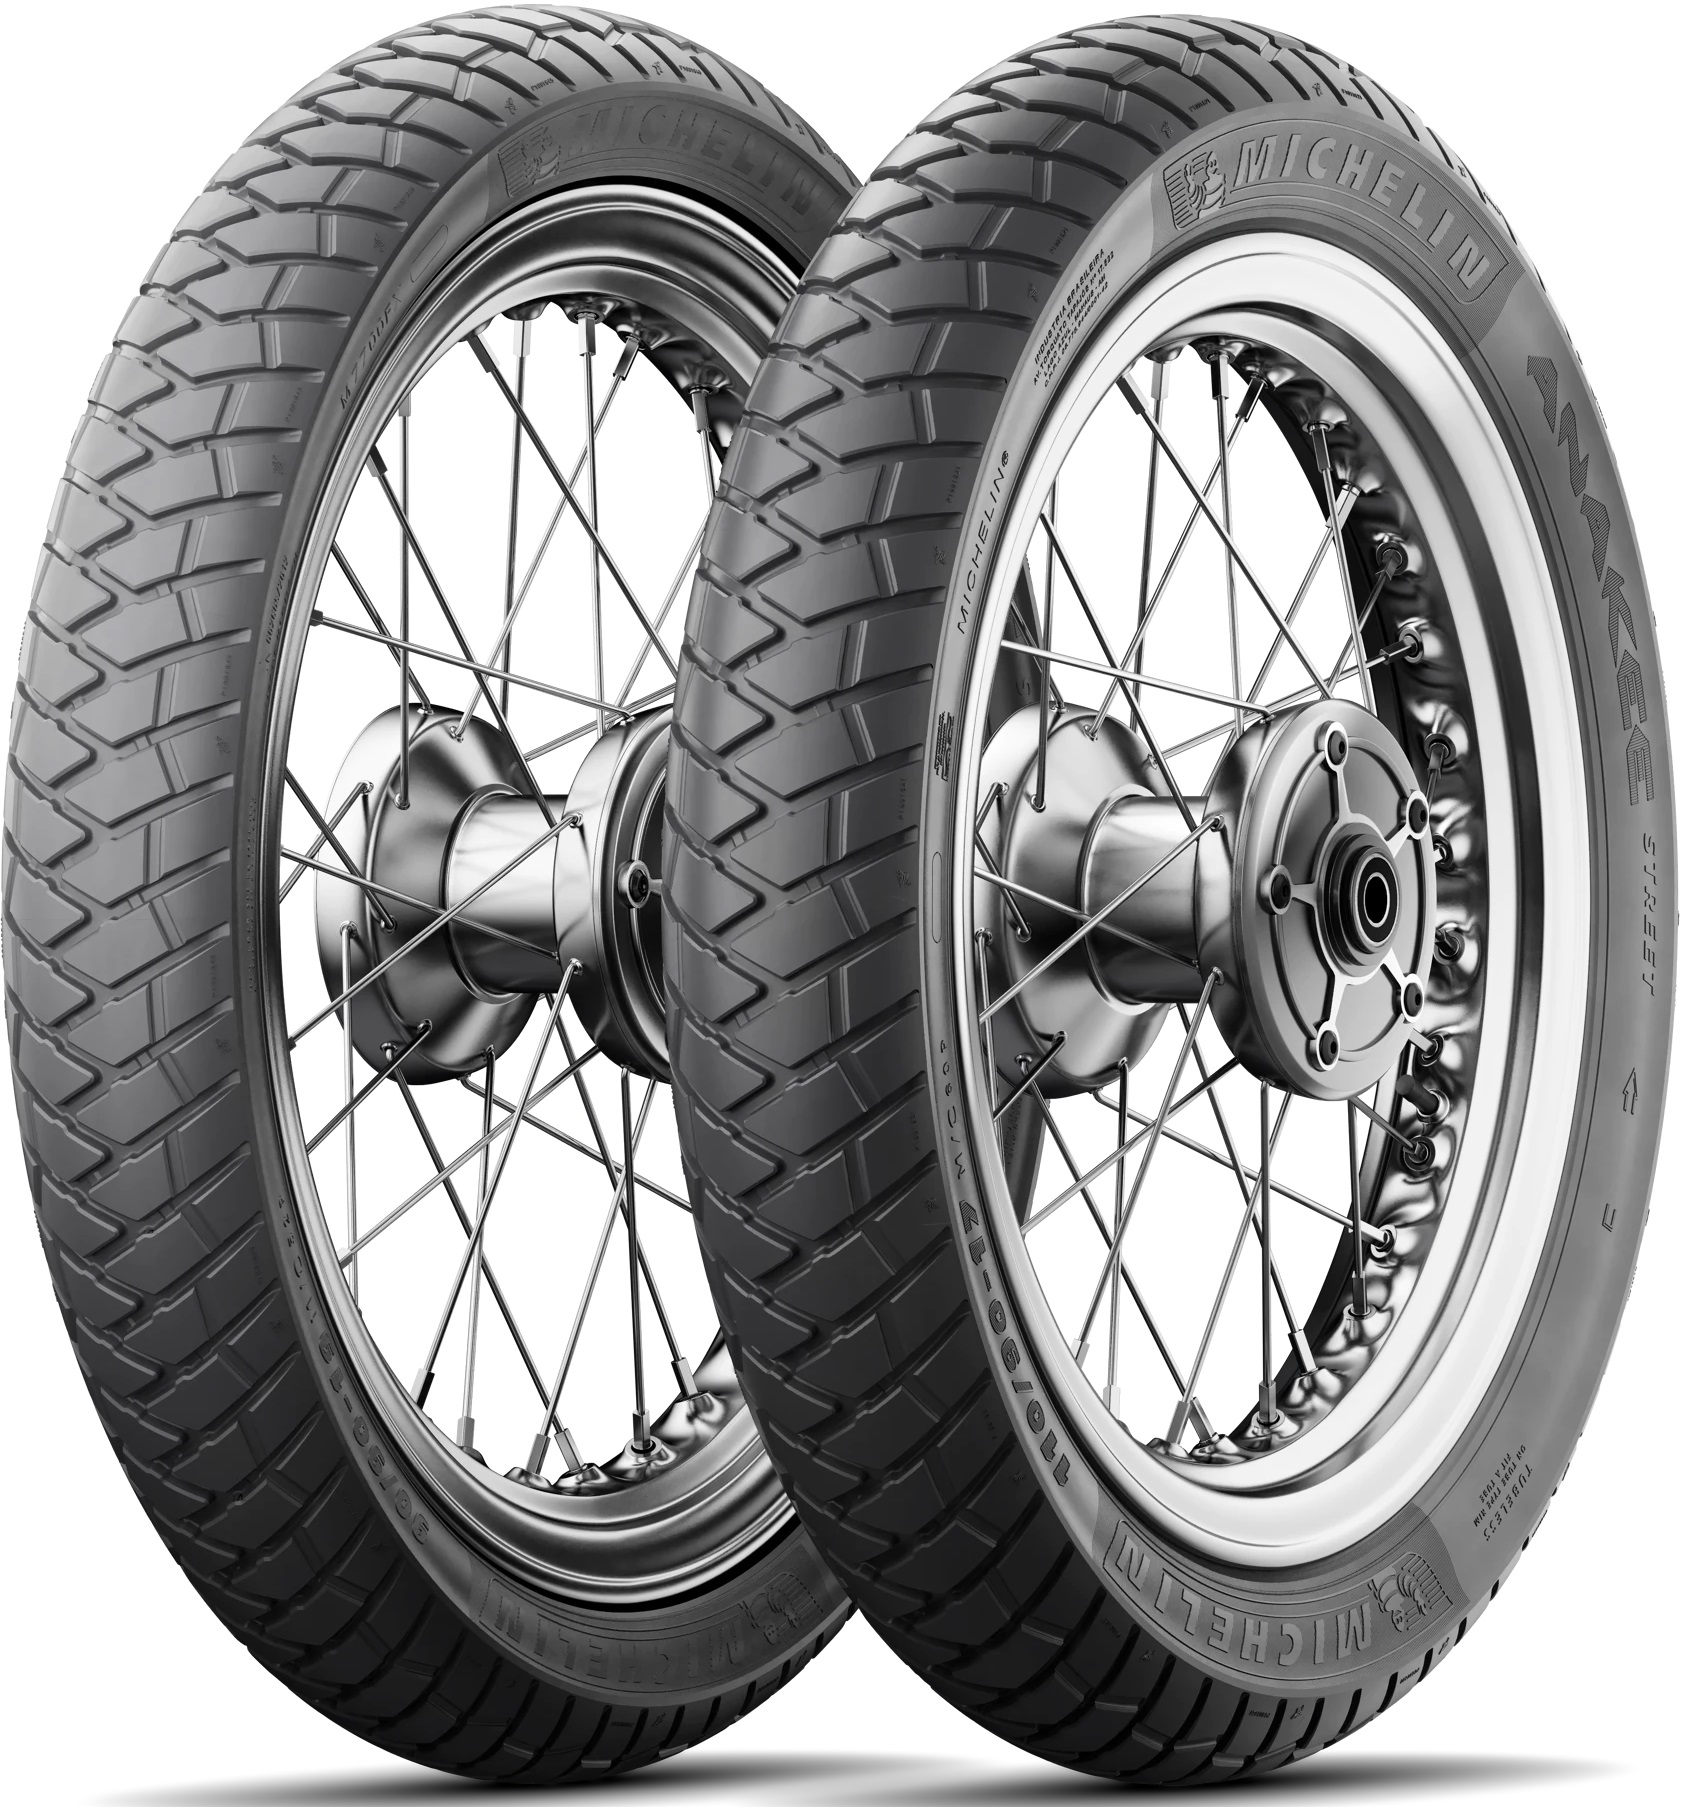 MICHELIN ANAKEE STREET 90/90 R 17 49S